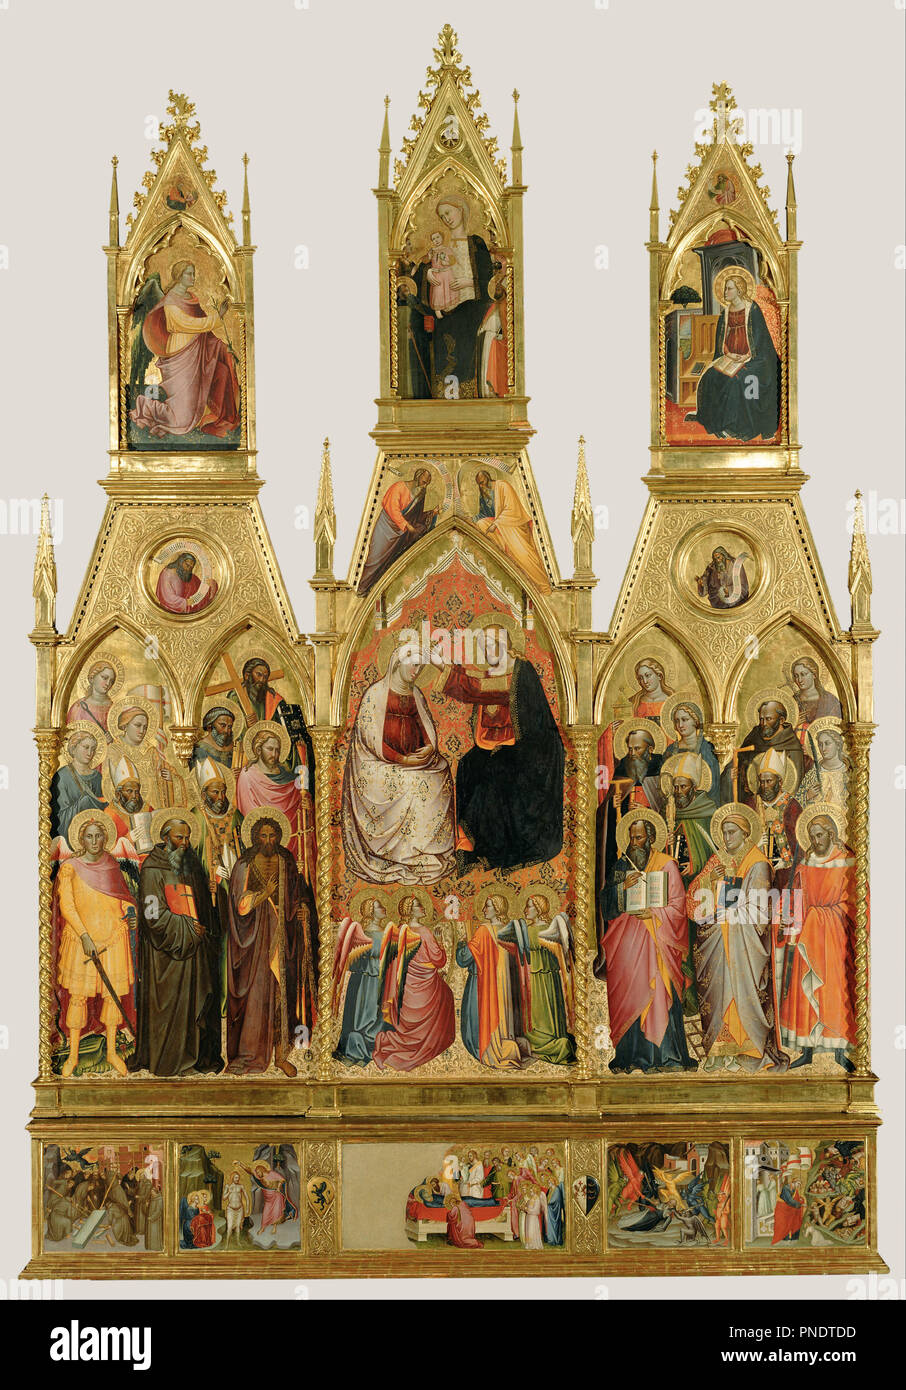 Polyptych with Coronation of the Virgin and Saints. Date/Period: Ca. 1390s. Painting. Tempera and gold leaf on panel. Height: 3,556 mm (11.66 ft); Width: 2,391 mm (94.13 in). Author: CENNI DI FRANCESCO DI SER CENNI. Stock Photo